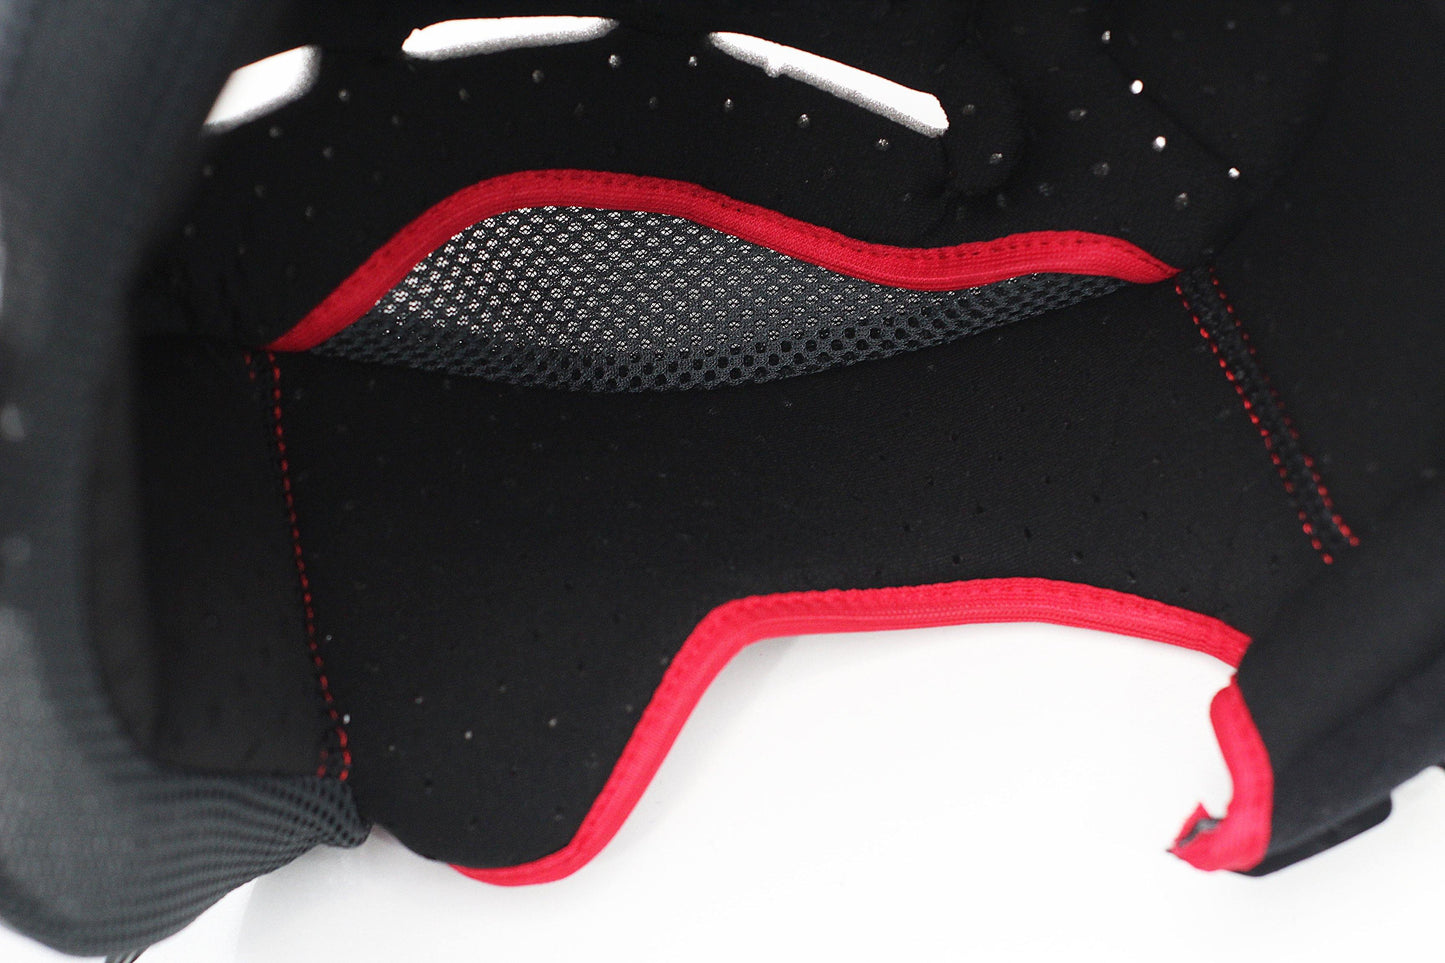 Nolan Interior for N100-5 (Black/Red) - Durian Bikers